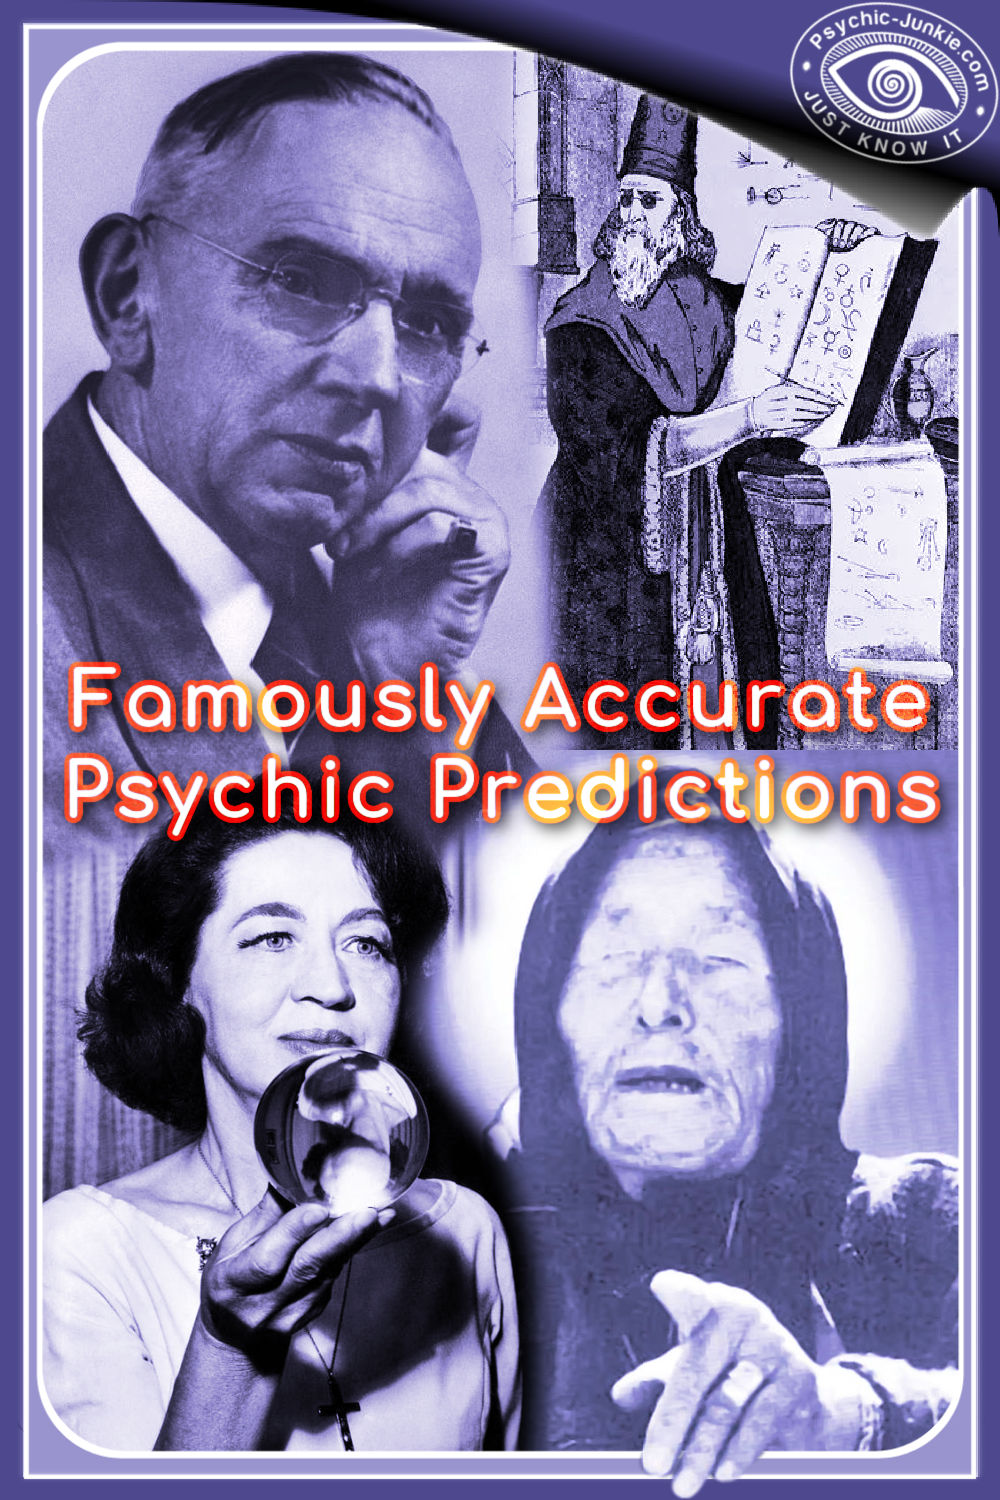 Eerily Accurate Psychic Predictions - Famous Glimpses Into The Unknown